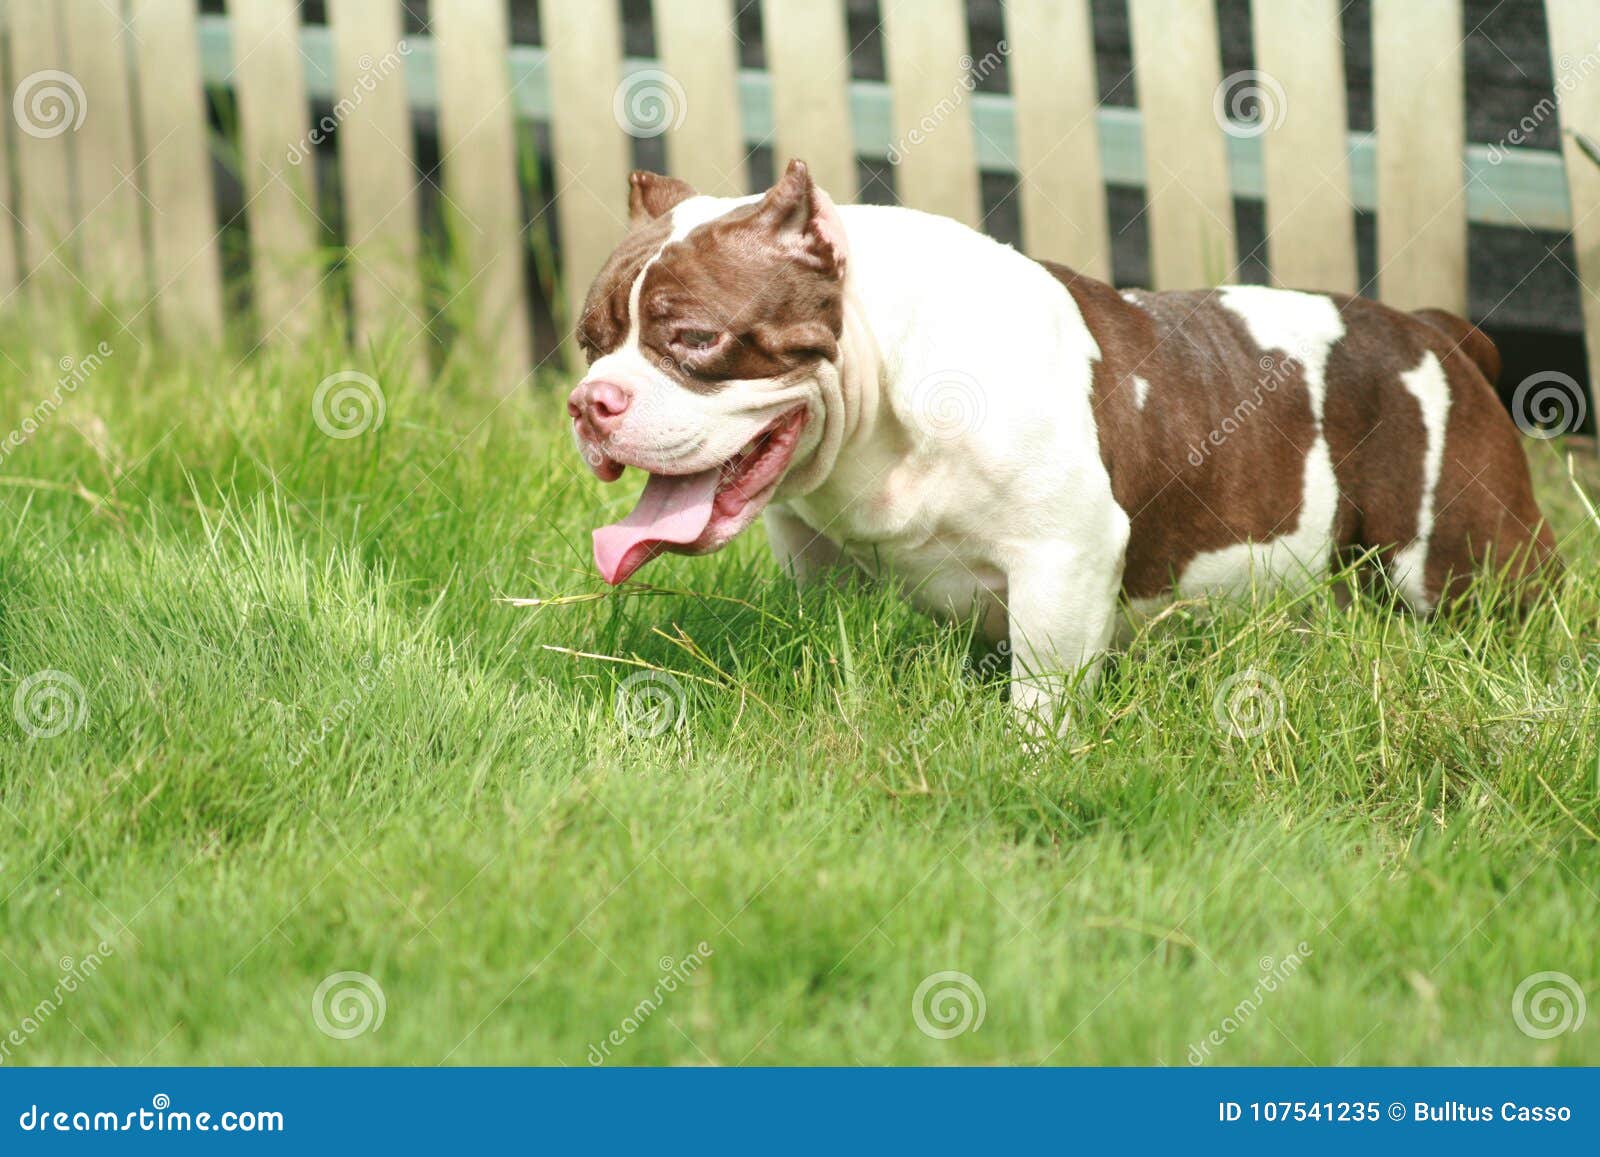 American Bully Size Pocket : Dog is Male White and Brown Color S ...